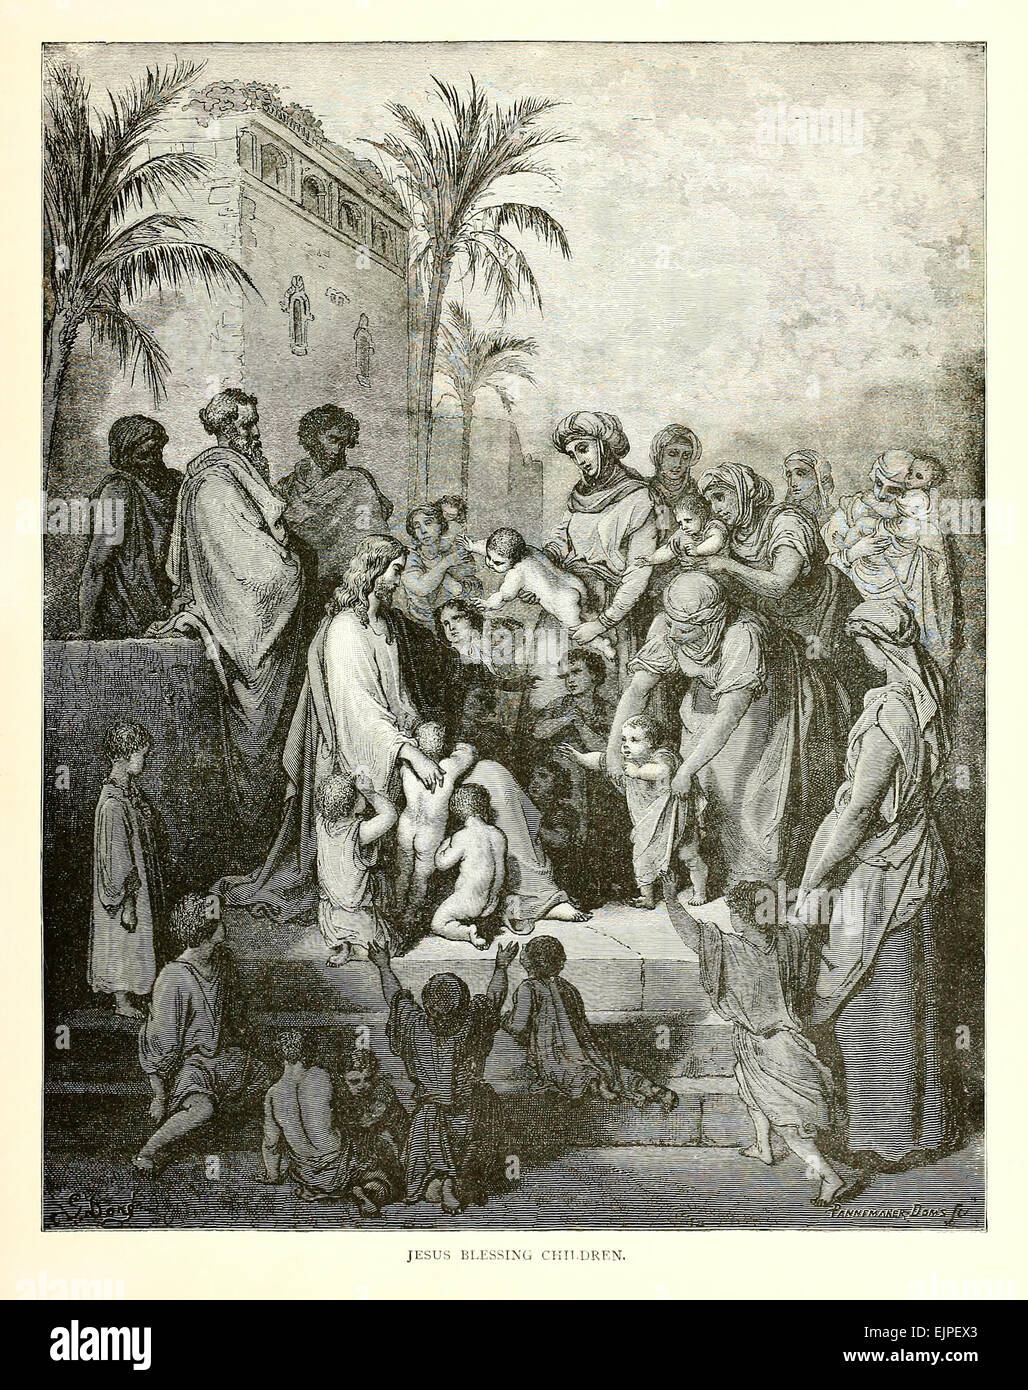 Illustration by Paul Gustave Doré (1832-1883) from 1880 edition of the Bible. See description for more information. Stock Photo